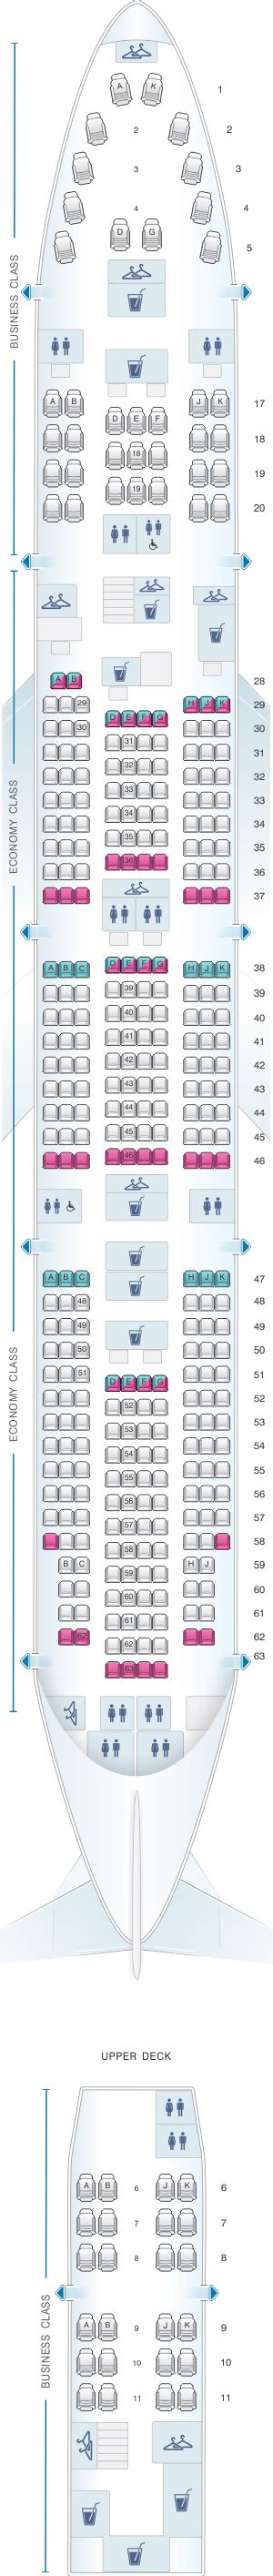 Seat Map China Airlines Boeing B747 400 375pax Seatmaestro